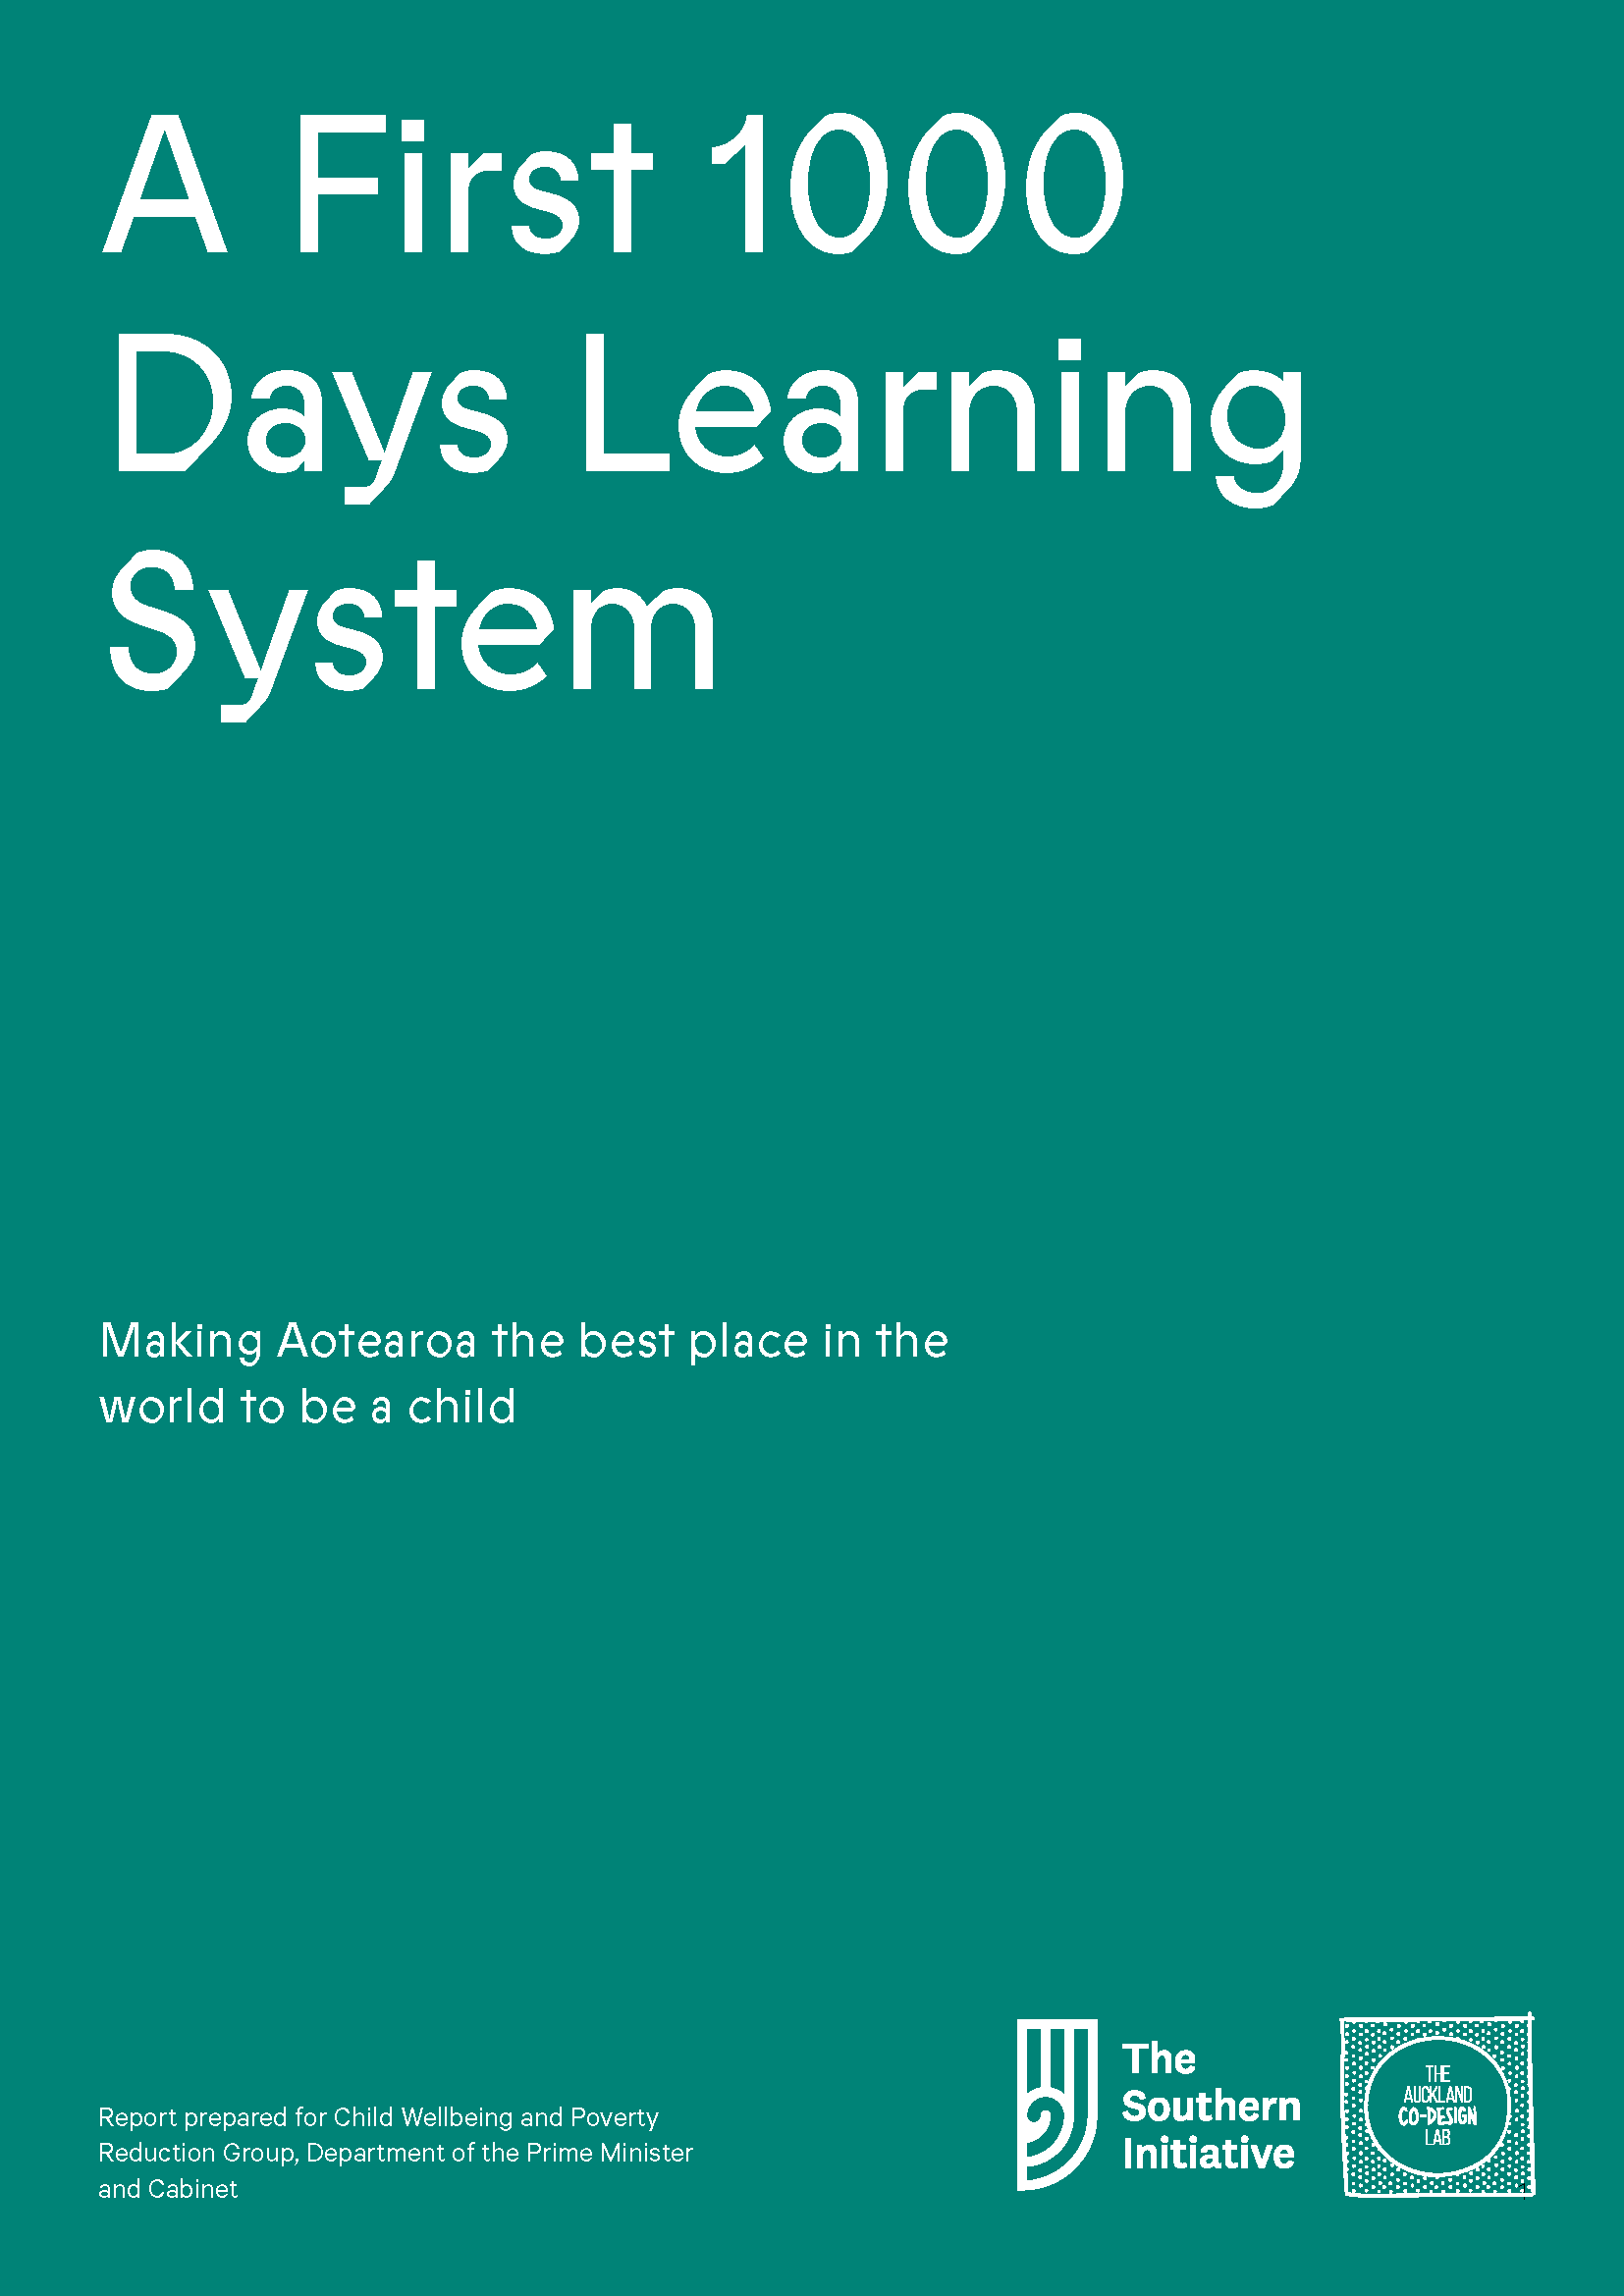 A First 1000 Days Learning System Nov 23_Page_01.png